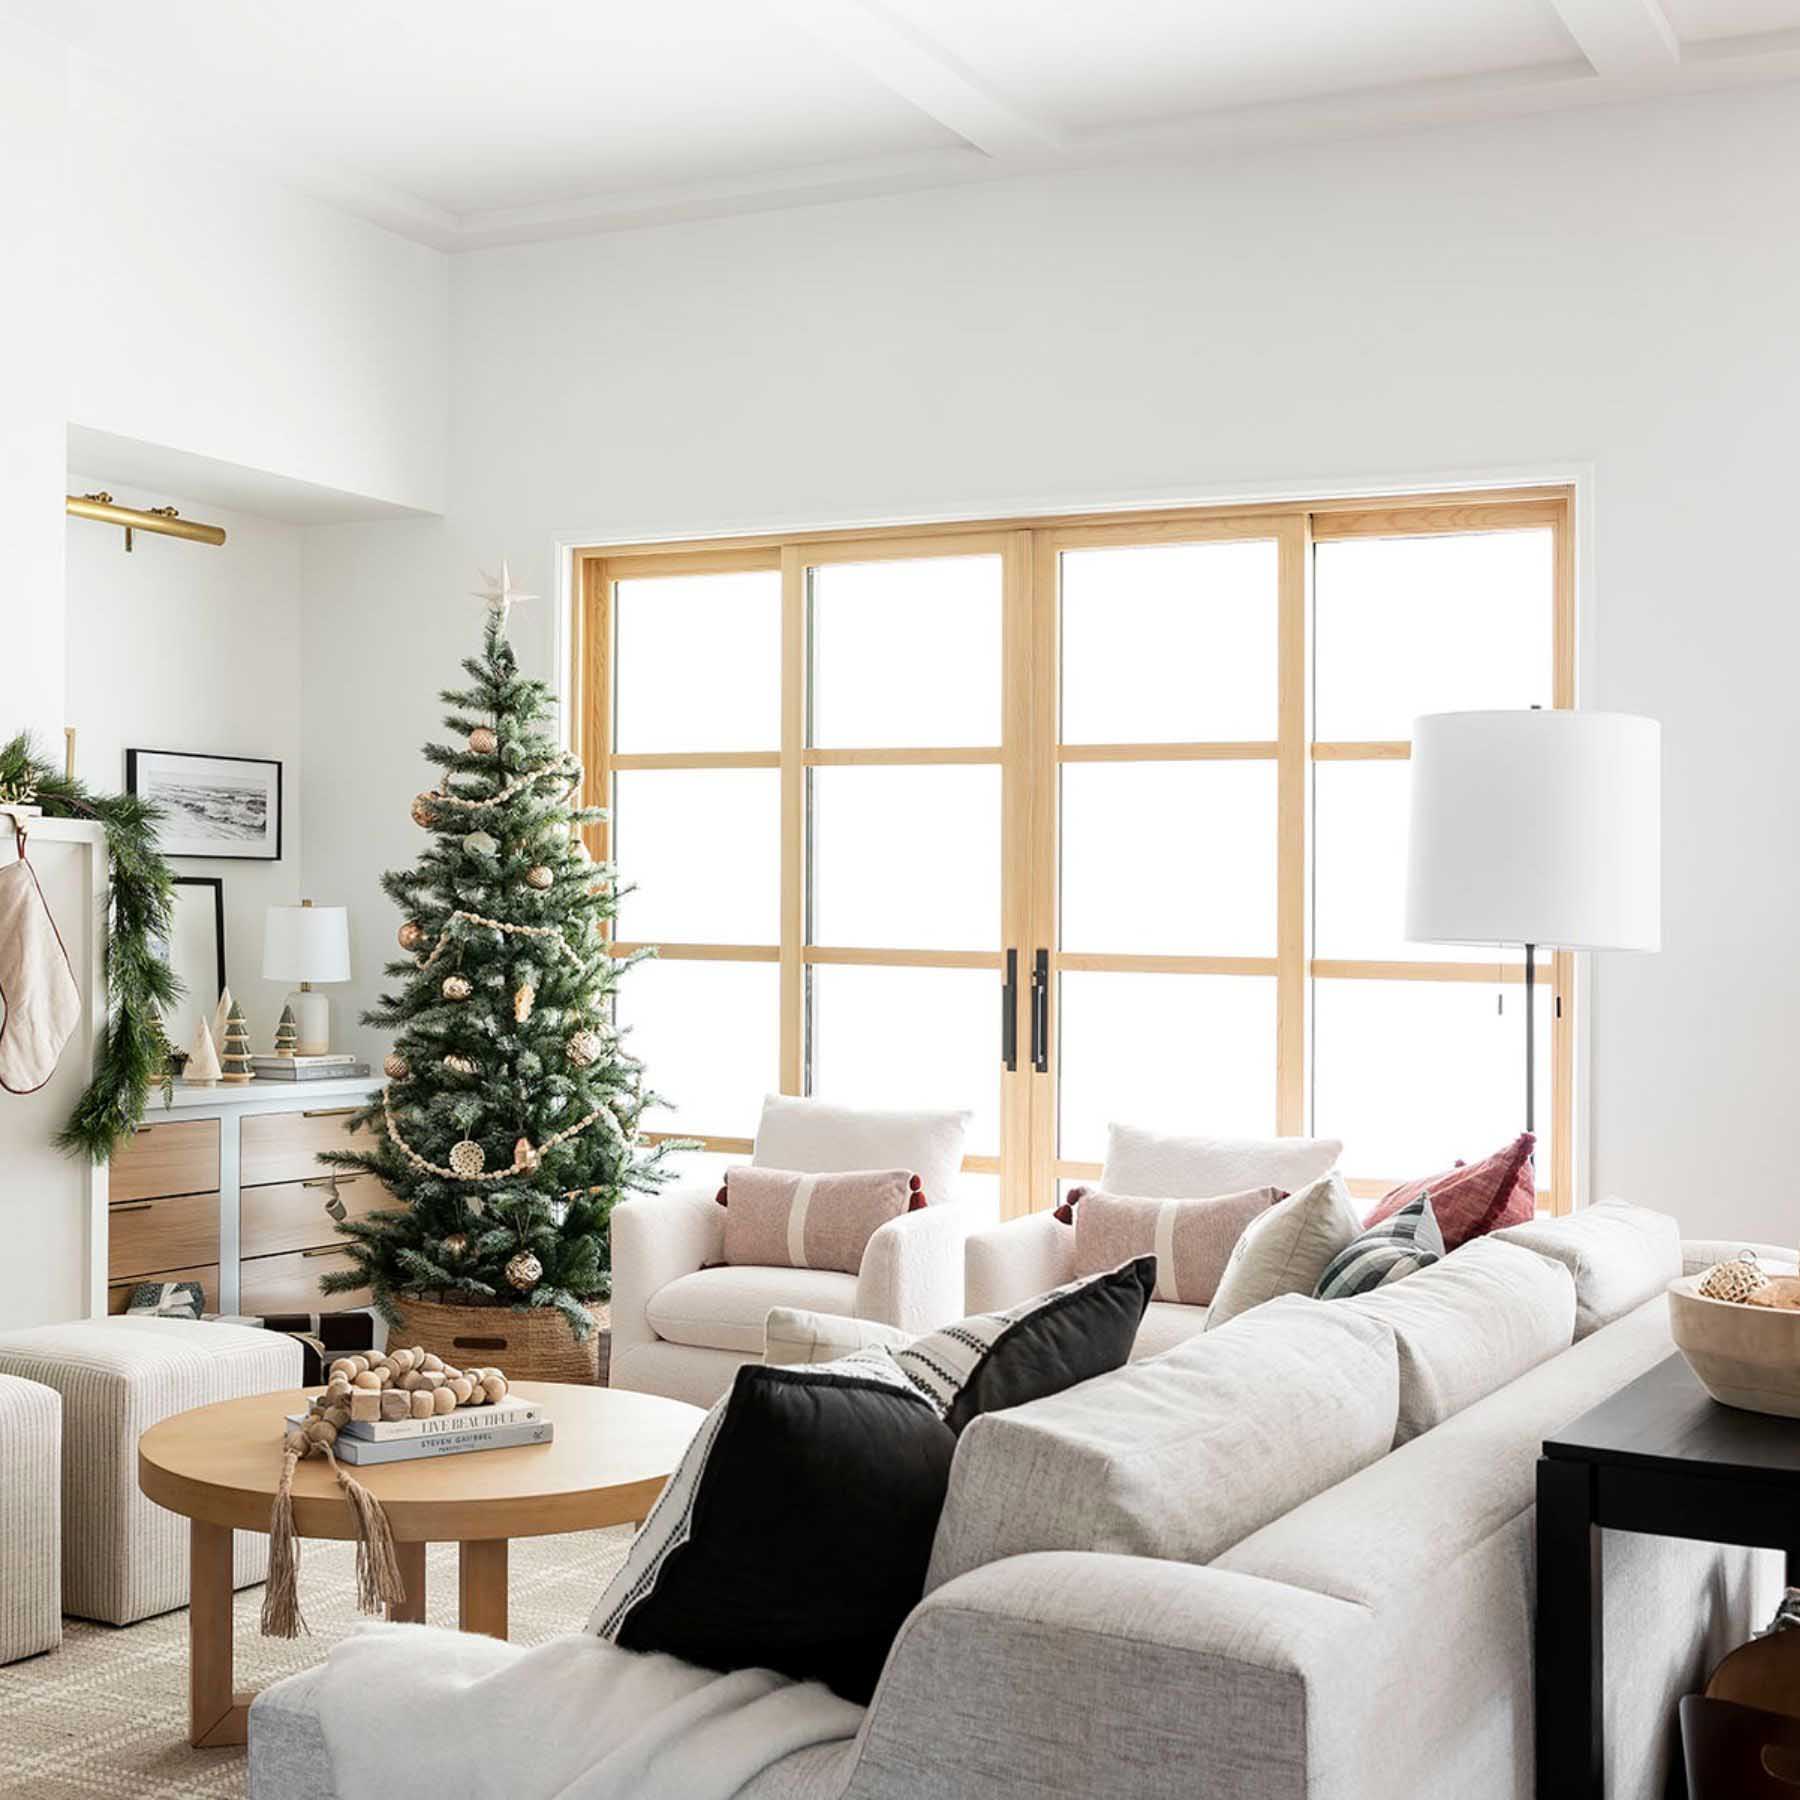 soft neutrals also help accentuate focal points such as the christmas tree or fireplace